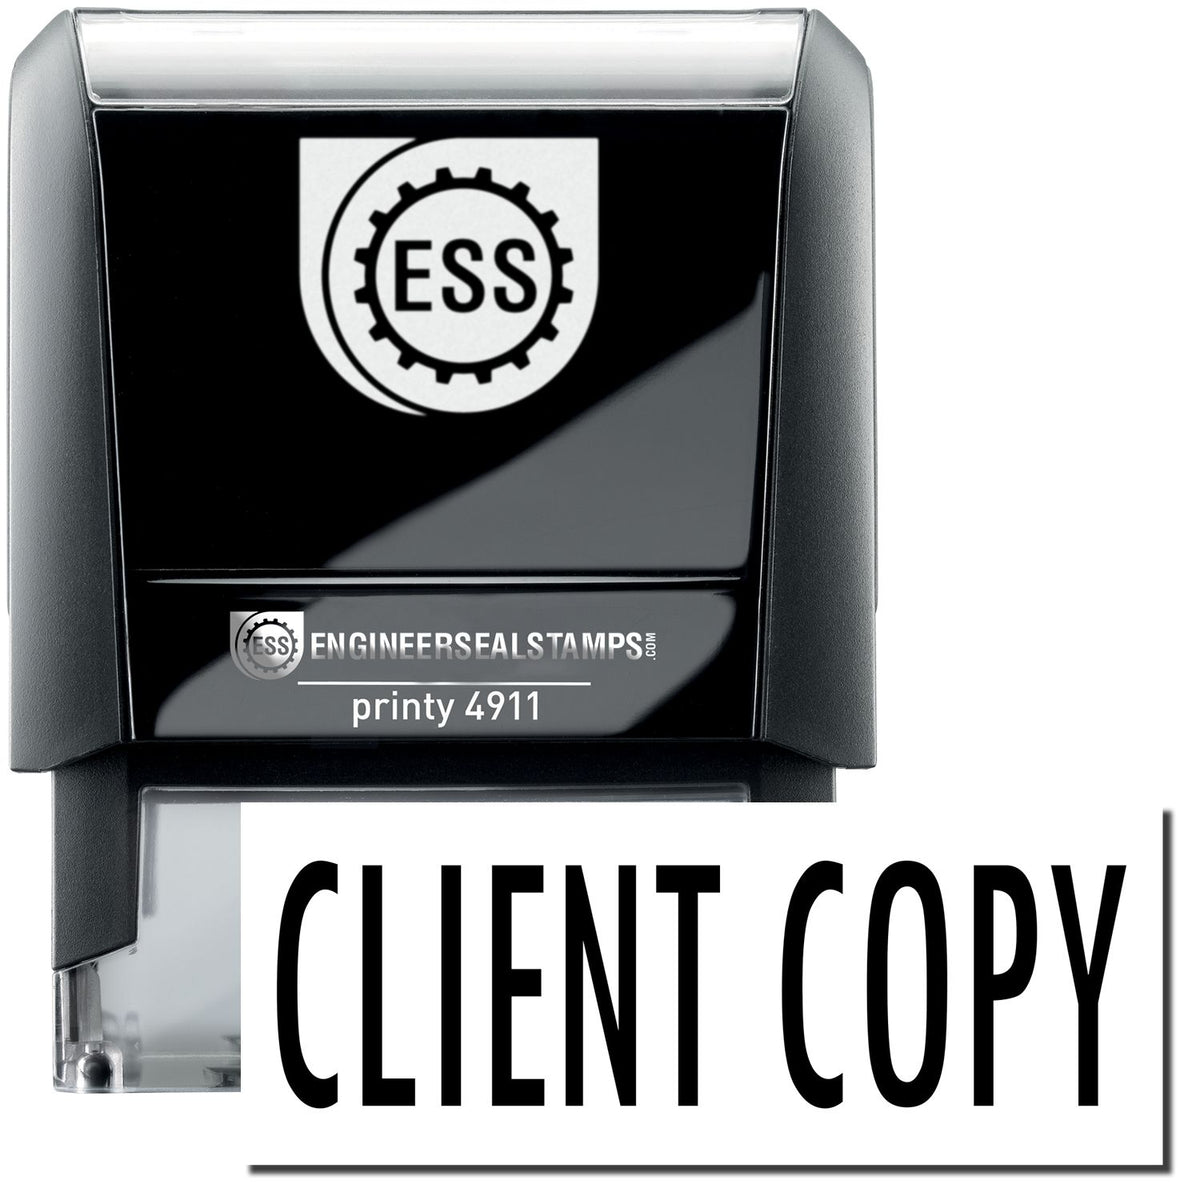 A self-inking stamp with a stamped image showing how the text &quot;CLIENT COPY&quot; is displayed after stamping.